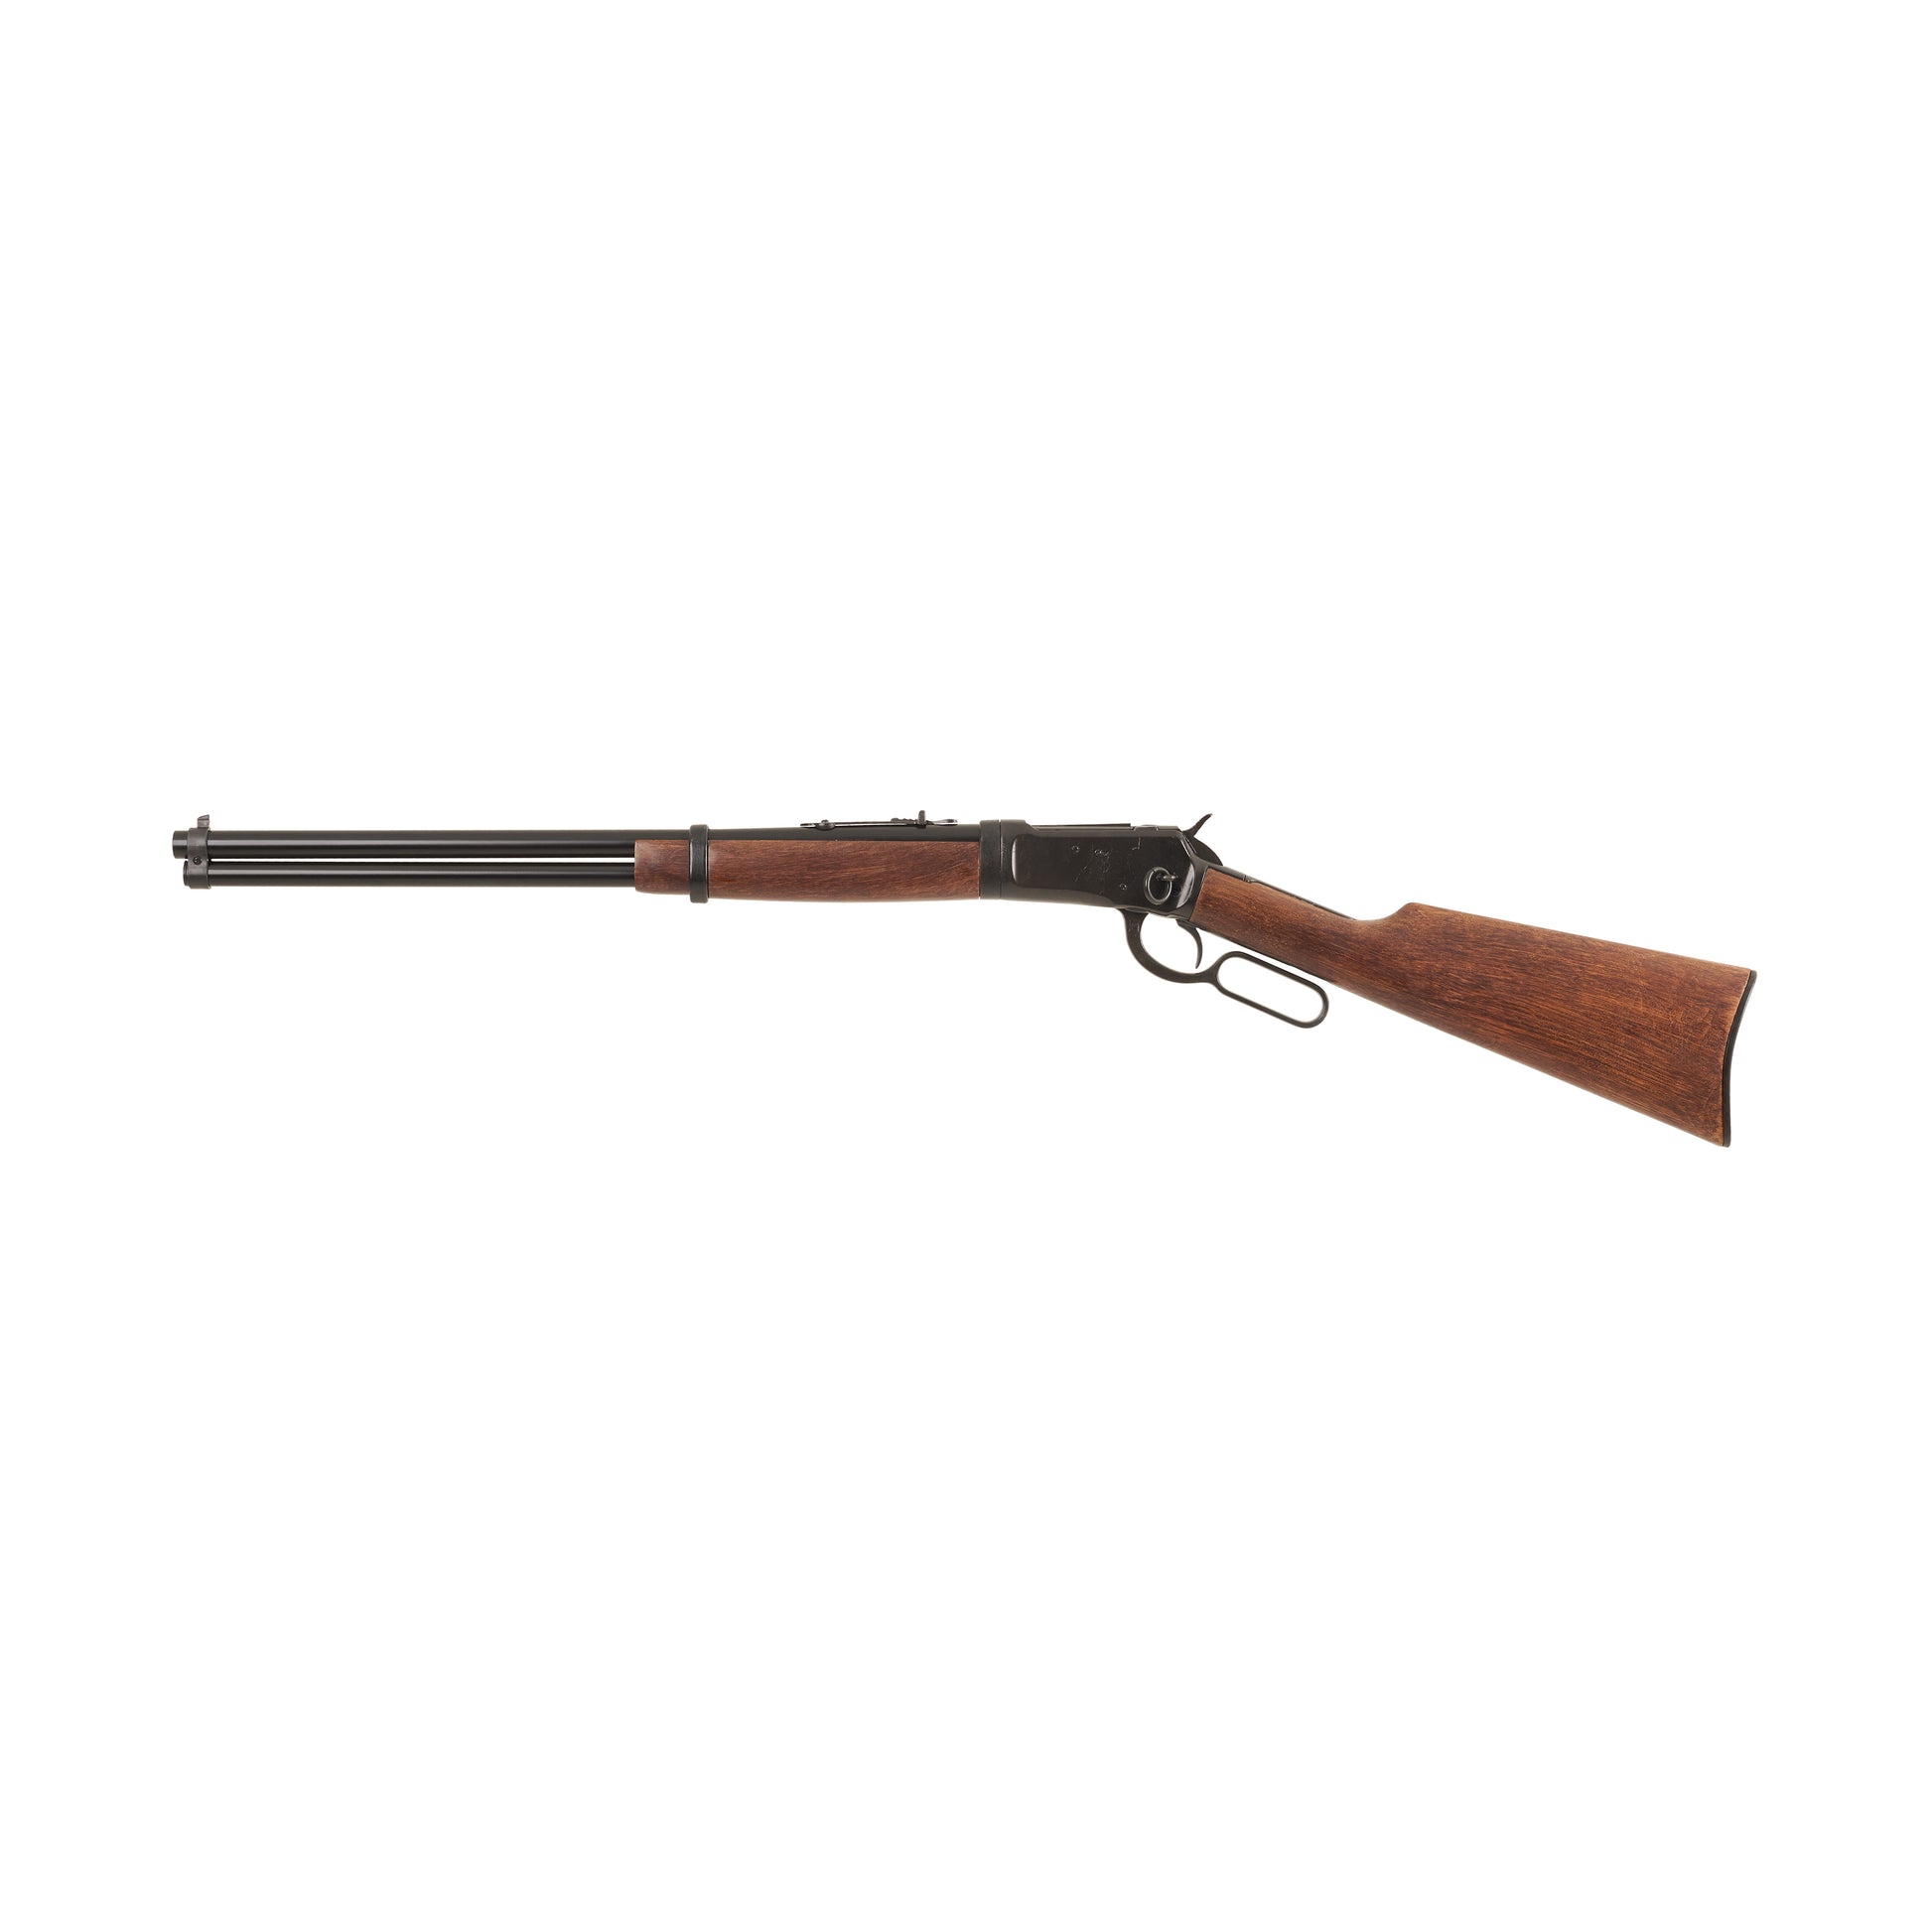 Left view of Replica 1892 Old West Rifle with wooden stock and black fittings and barrel.